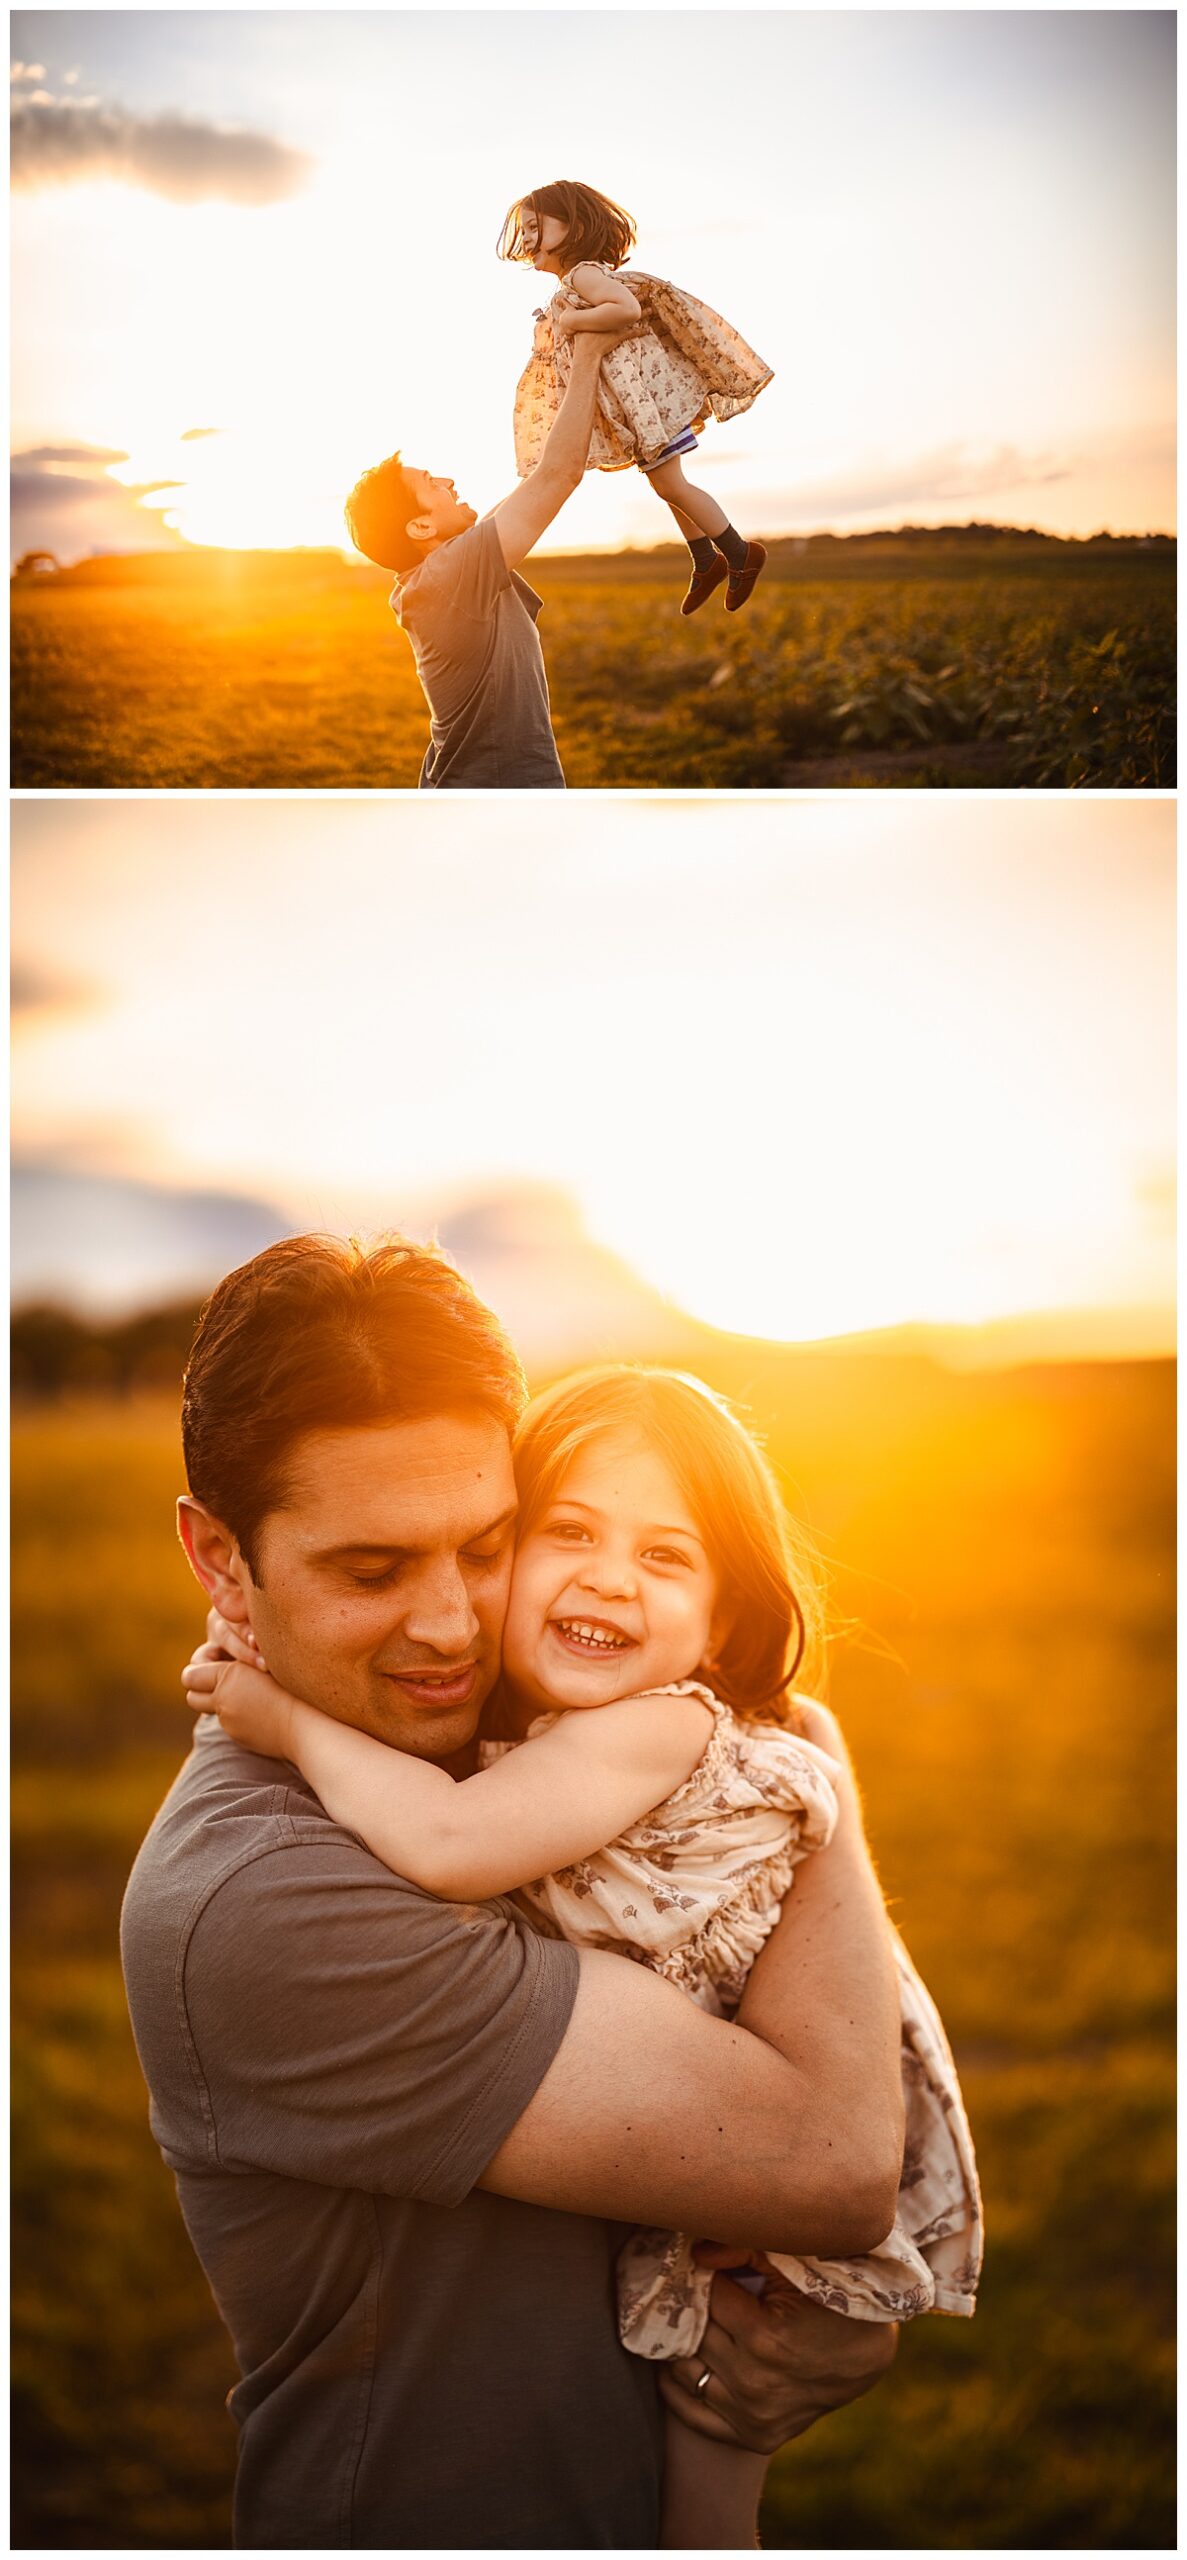 Dad and daughter embrace each other for Sunflower Field Family Photos